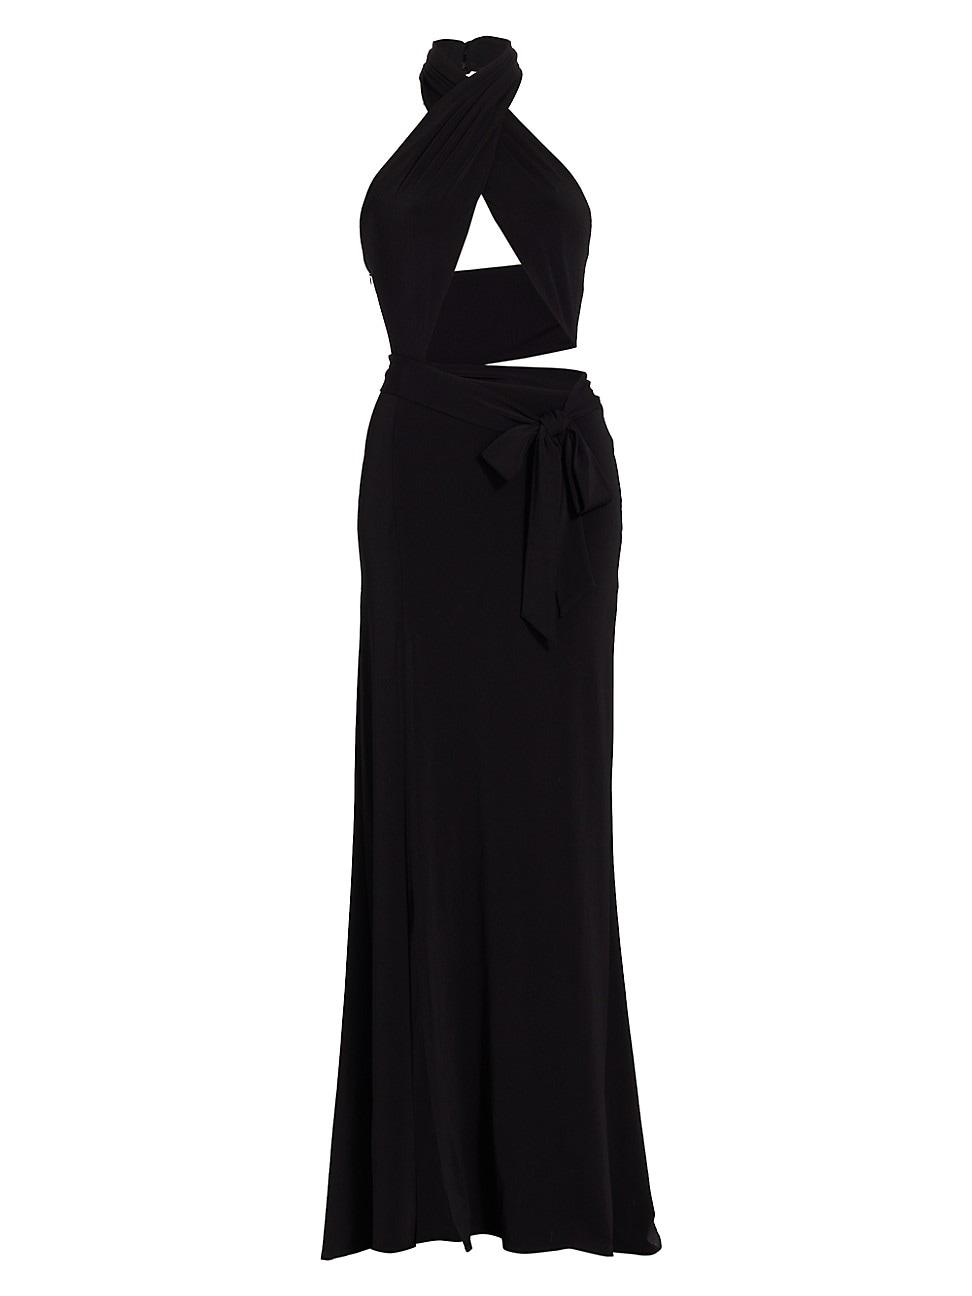 Alice + Olivia May Halter Wrap Gown in Black | Lyst